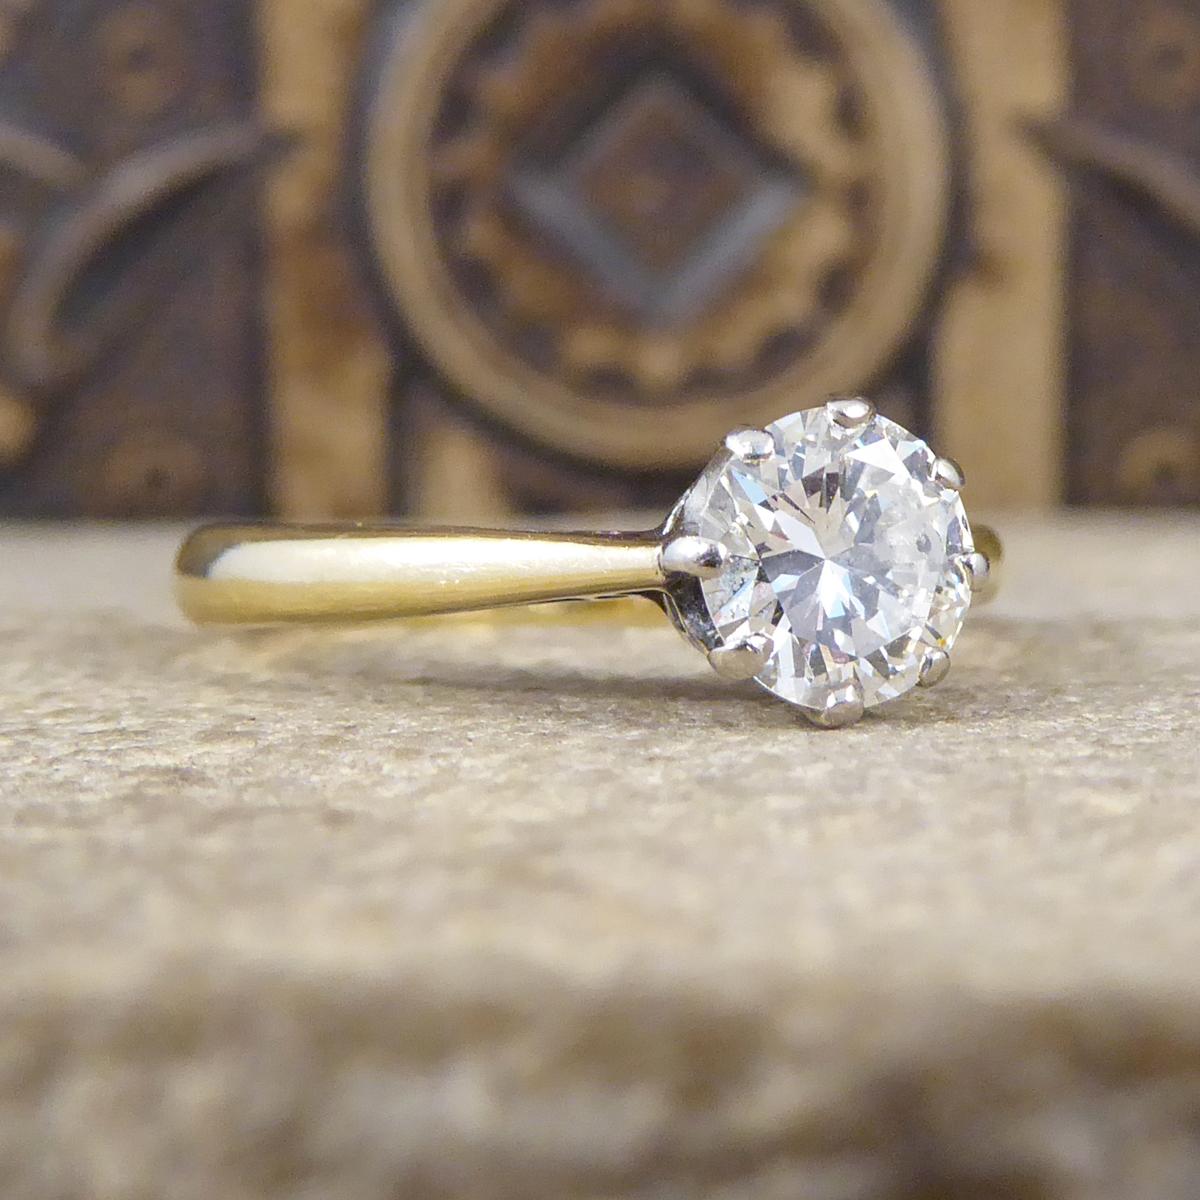 This beautifully sparkly engagement ring holds a Brilliant cut Diamond weighing 0.85ct and is set in a Platinum eight claw setting leading down to an 18ct band with 